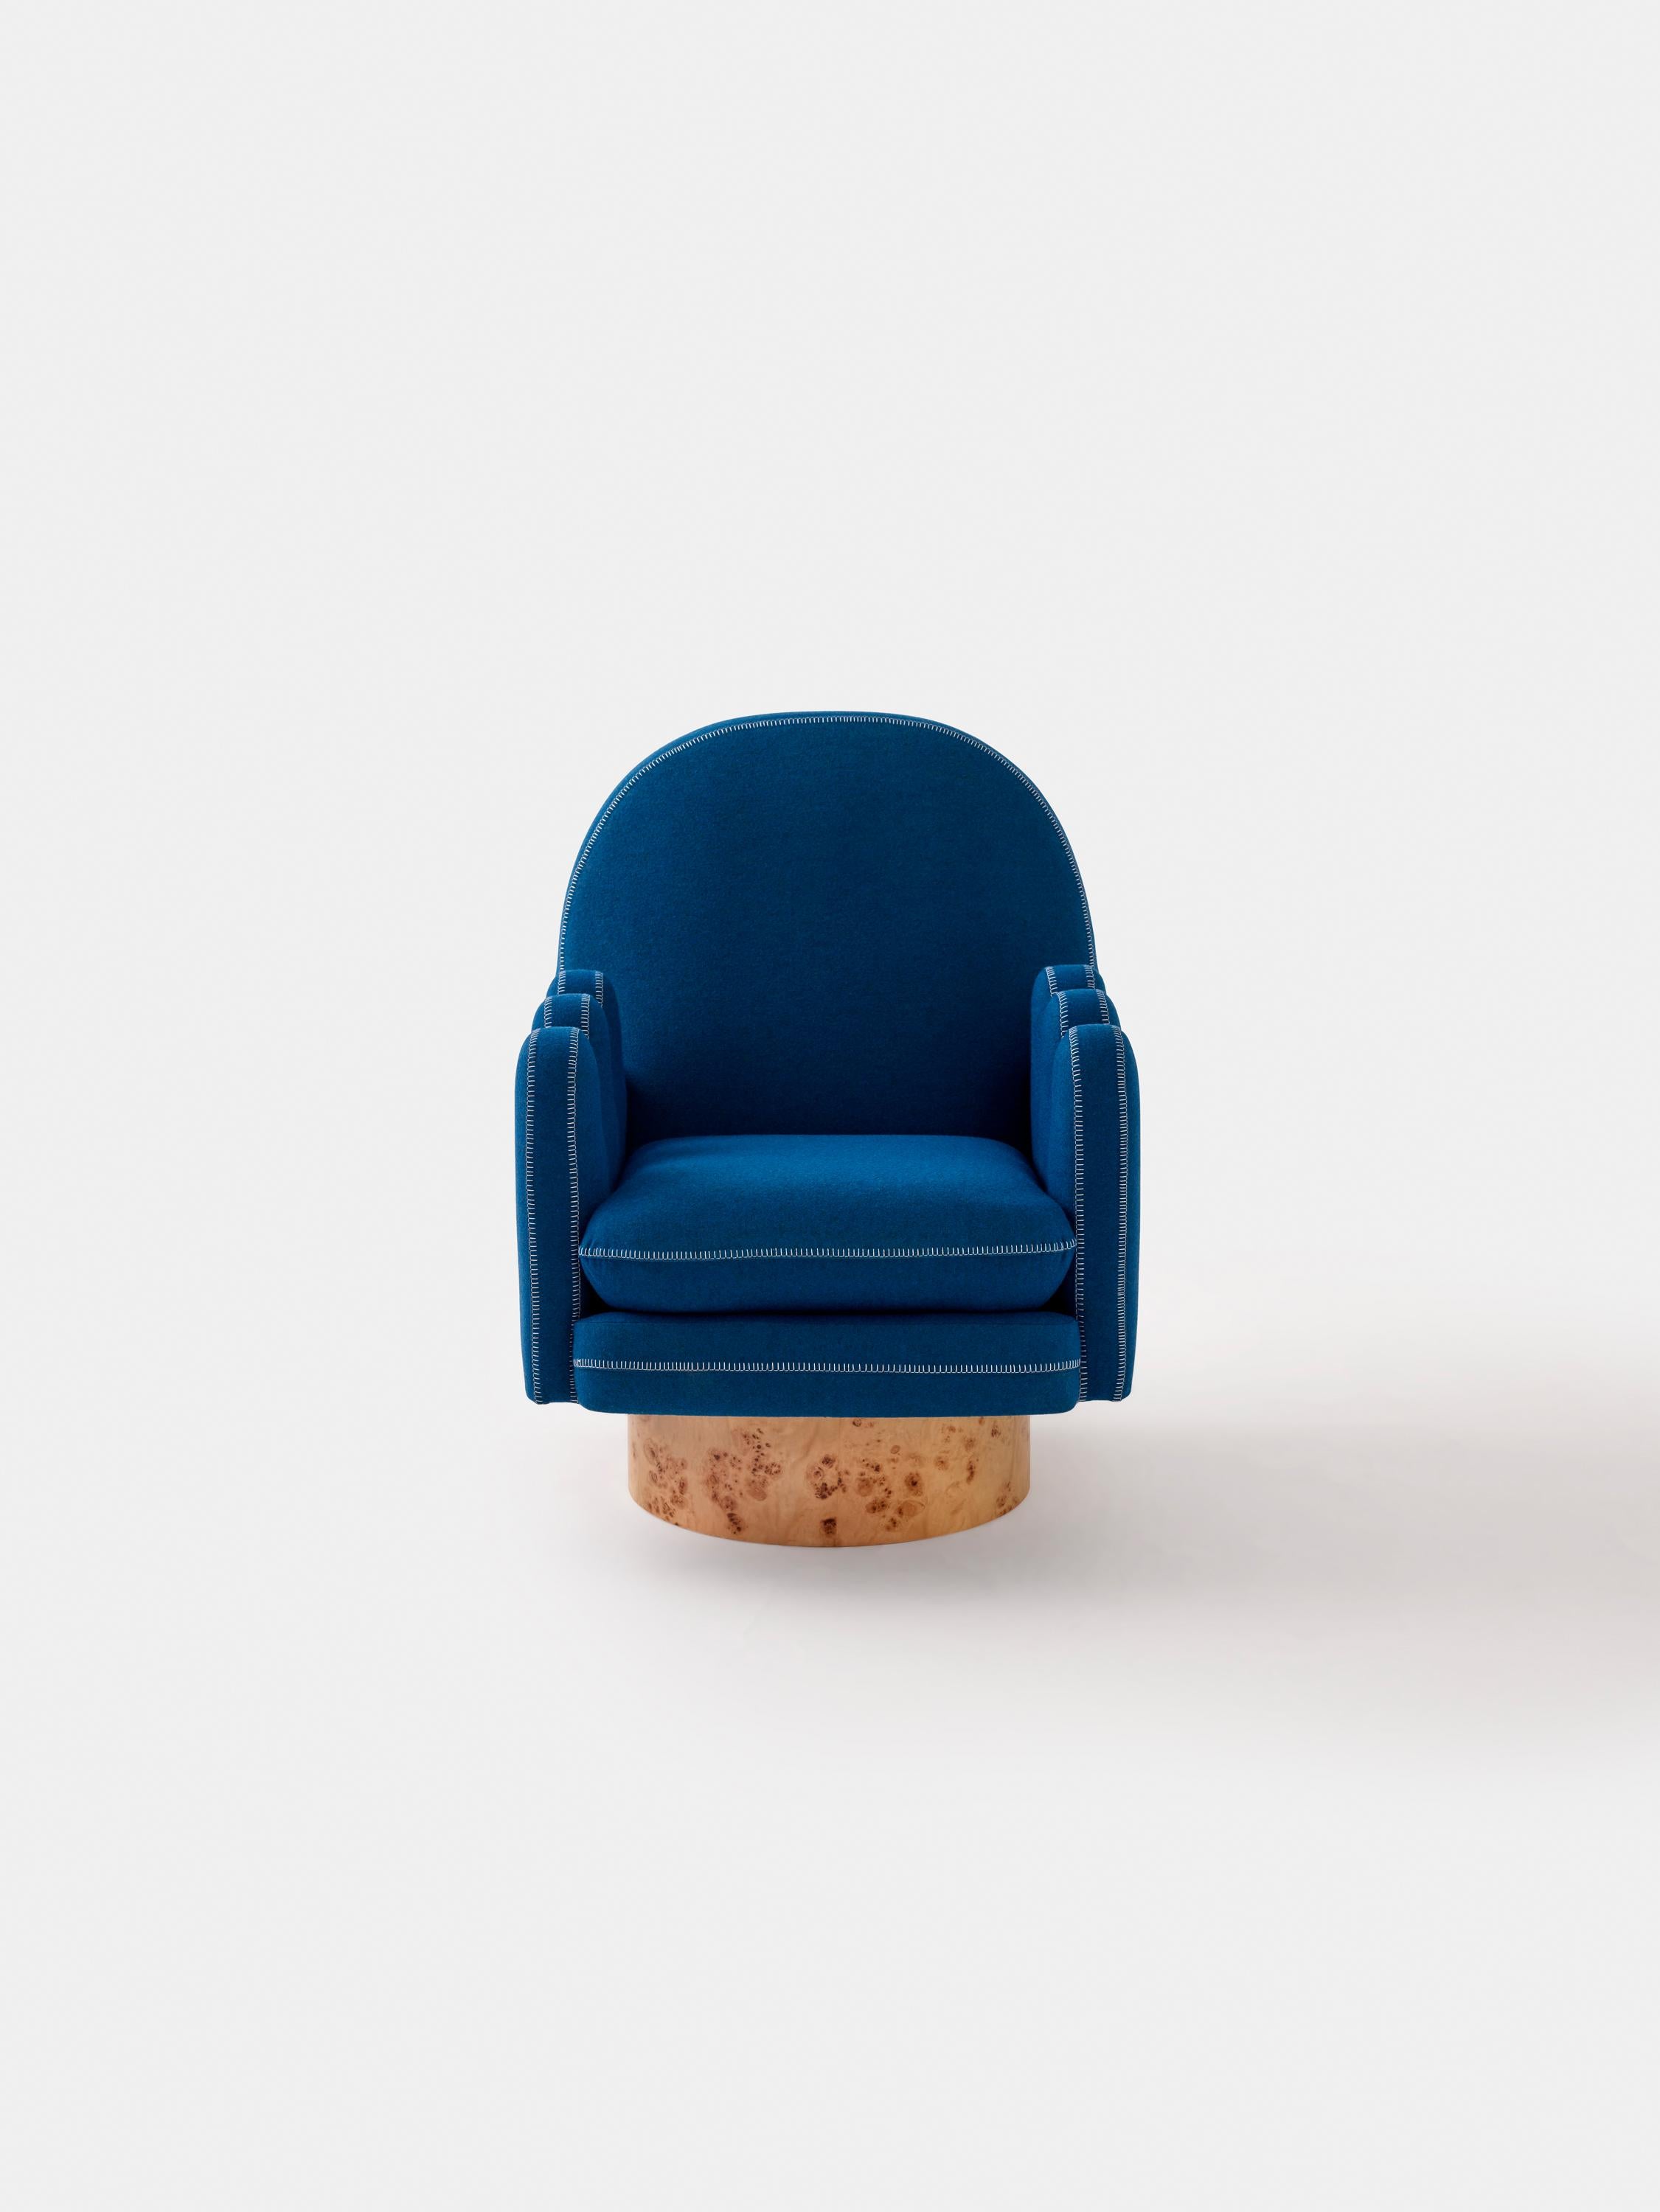 Semo Armchair with Blue Fabric and Polished Burl Wood In New Condition For Sale In New York, NY